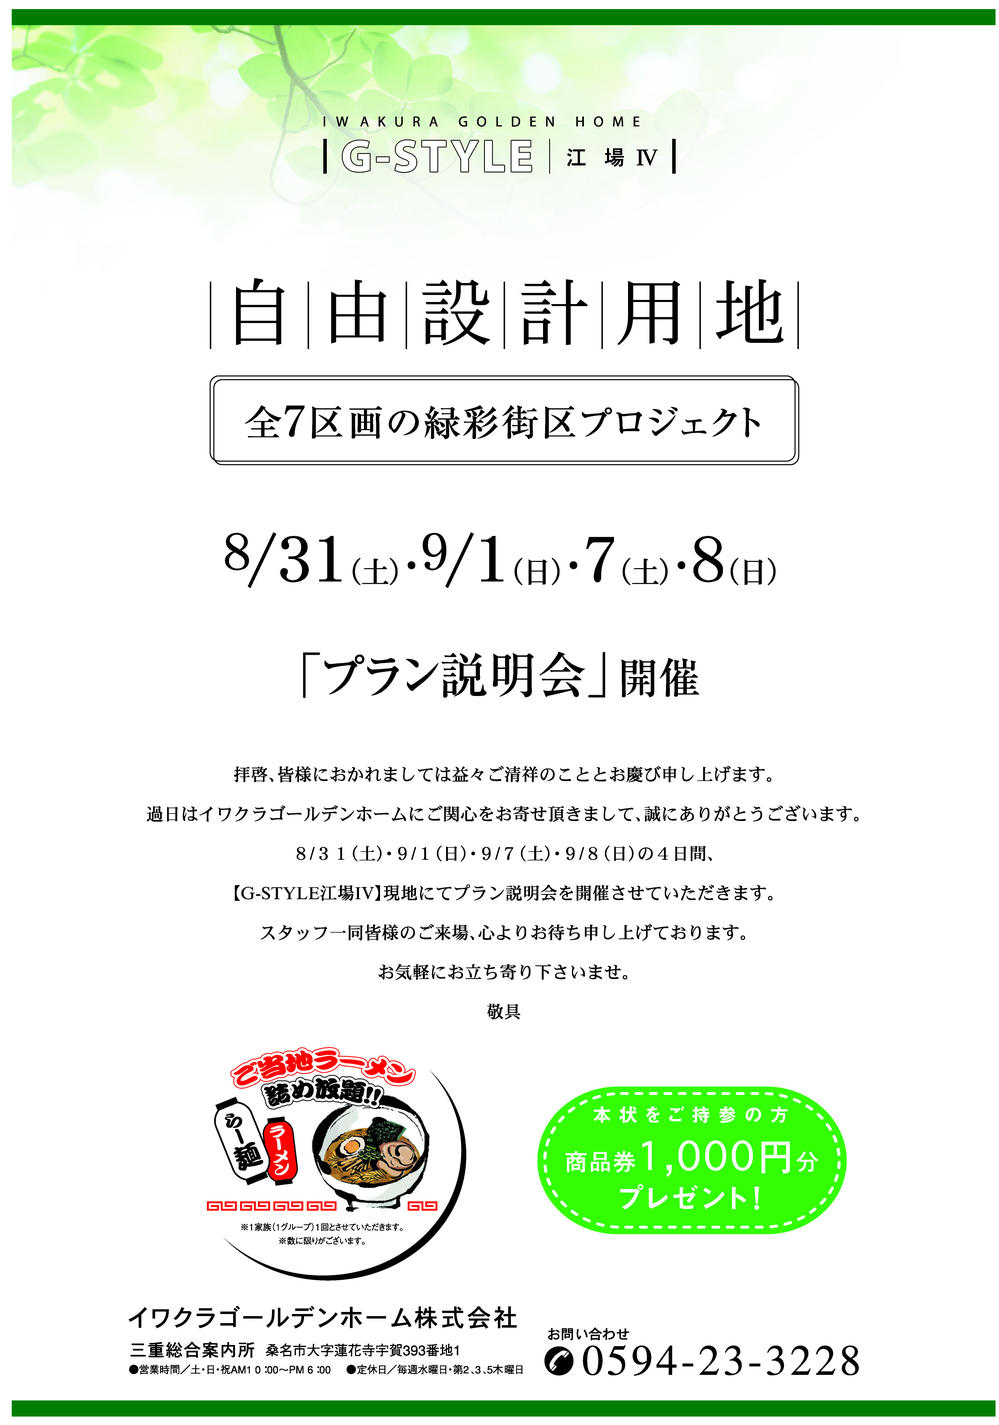 Other. 8 / 31 is from the event held!  We look forward to your visit